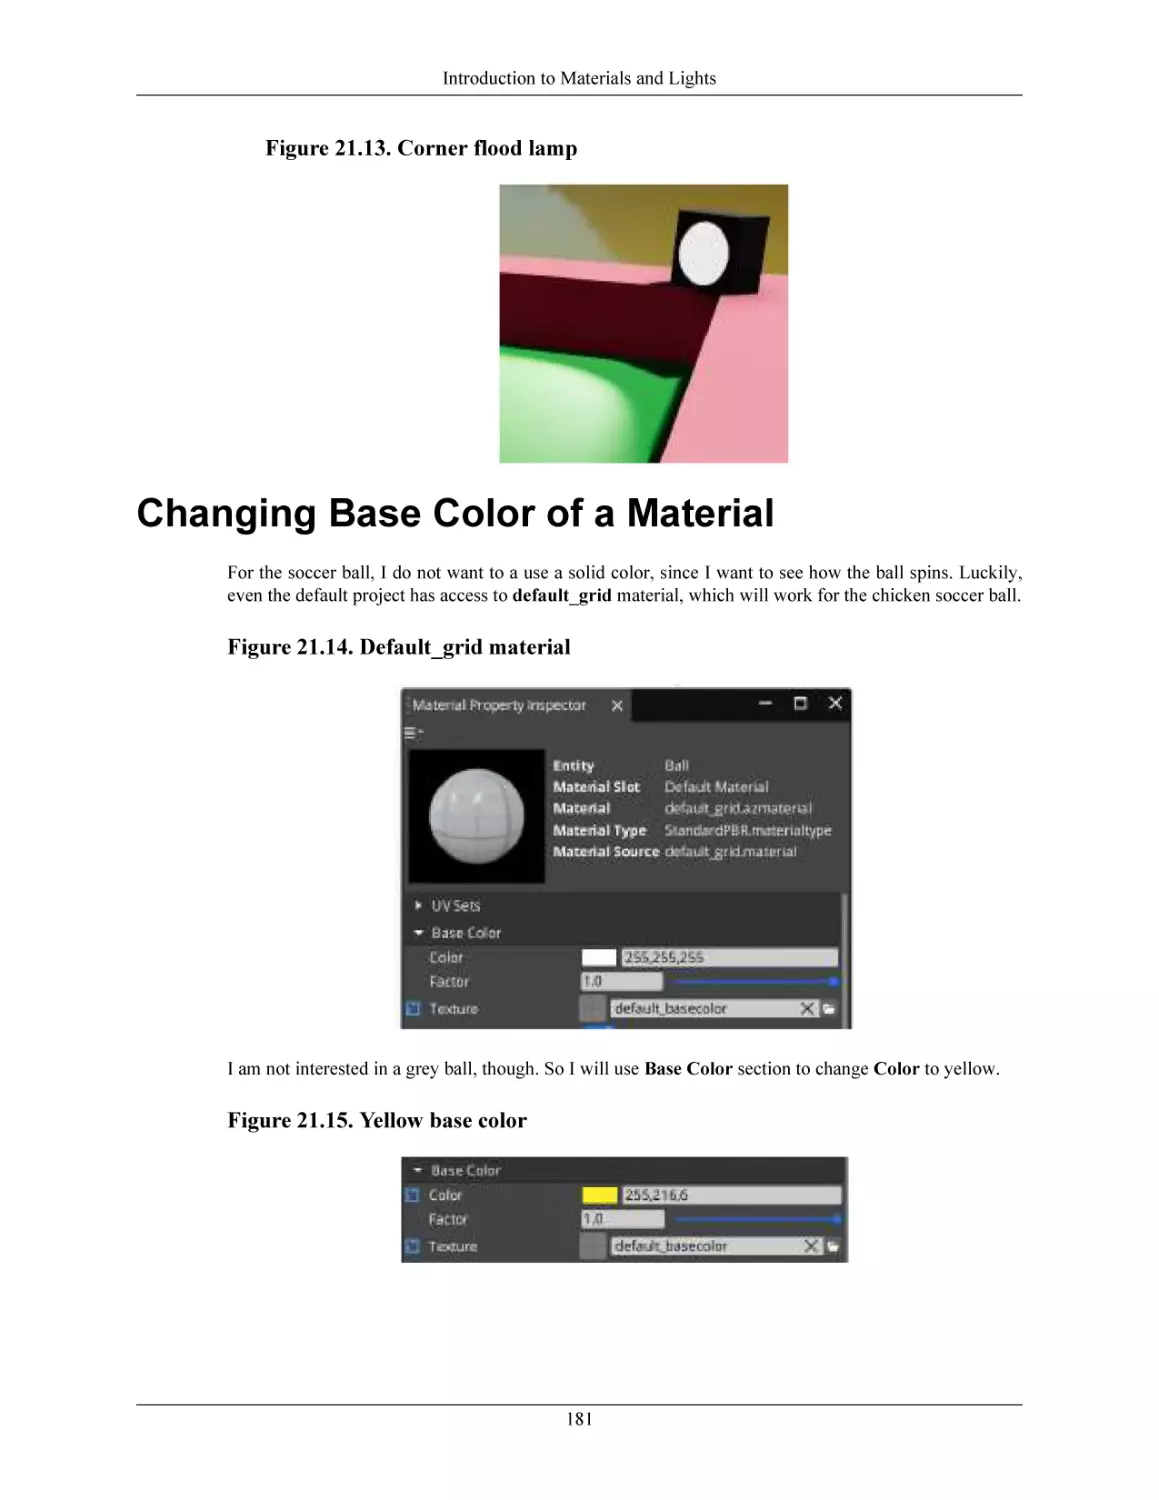 Changing Base Color of a Material